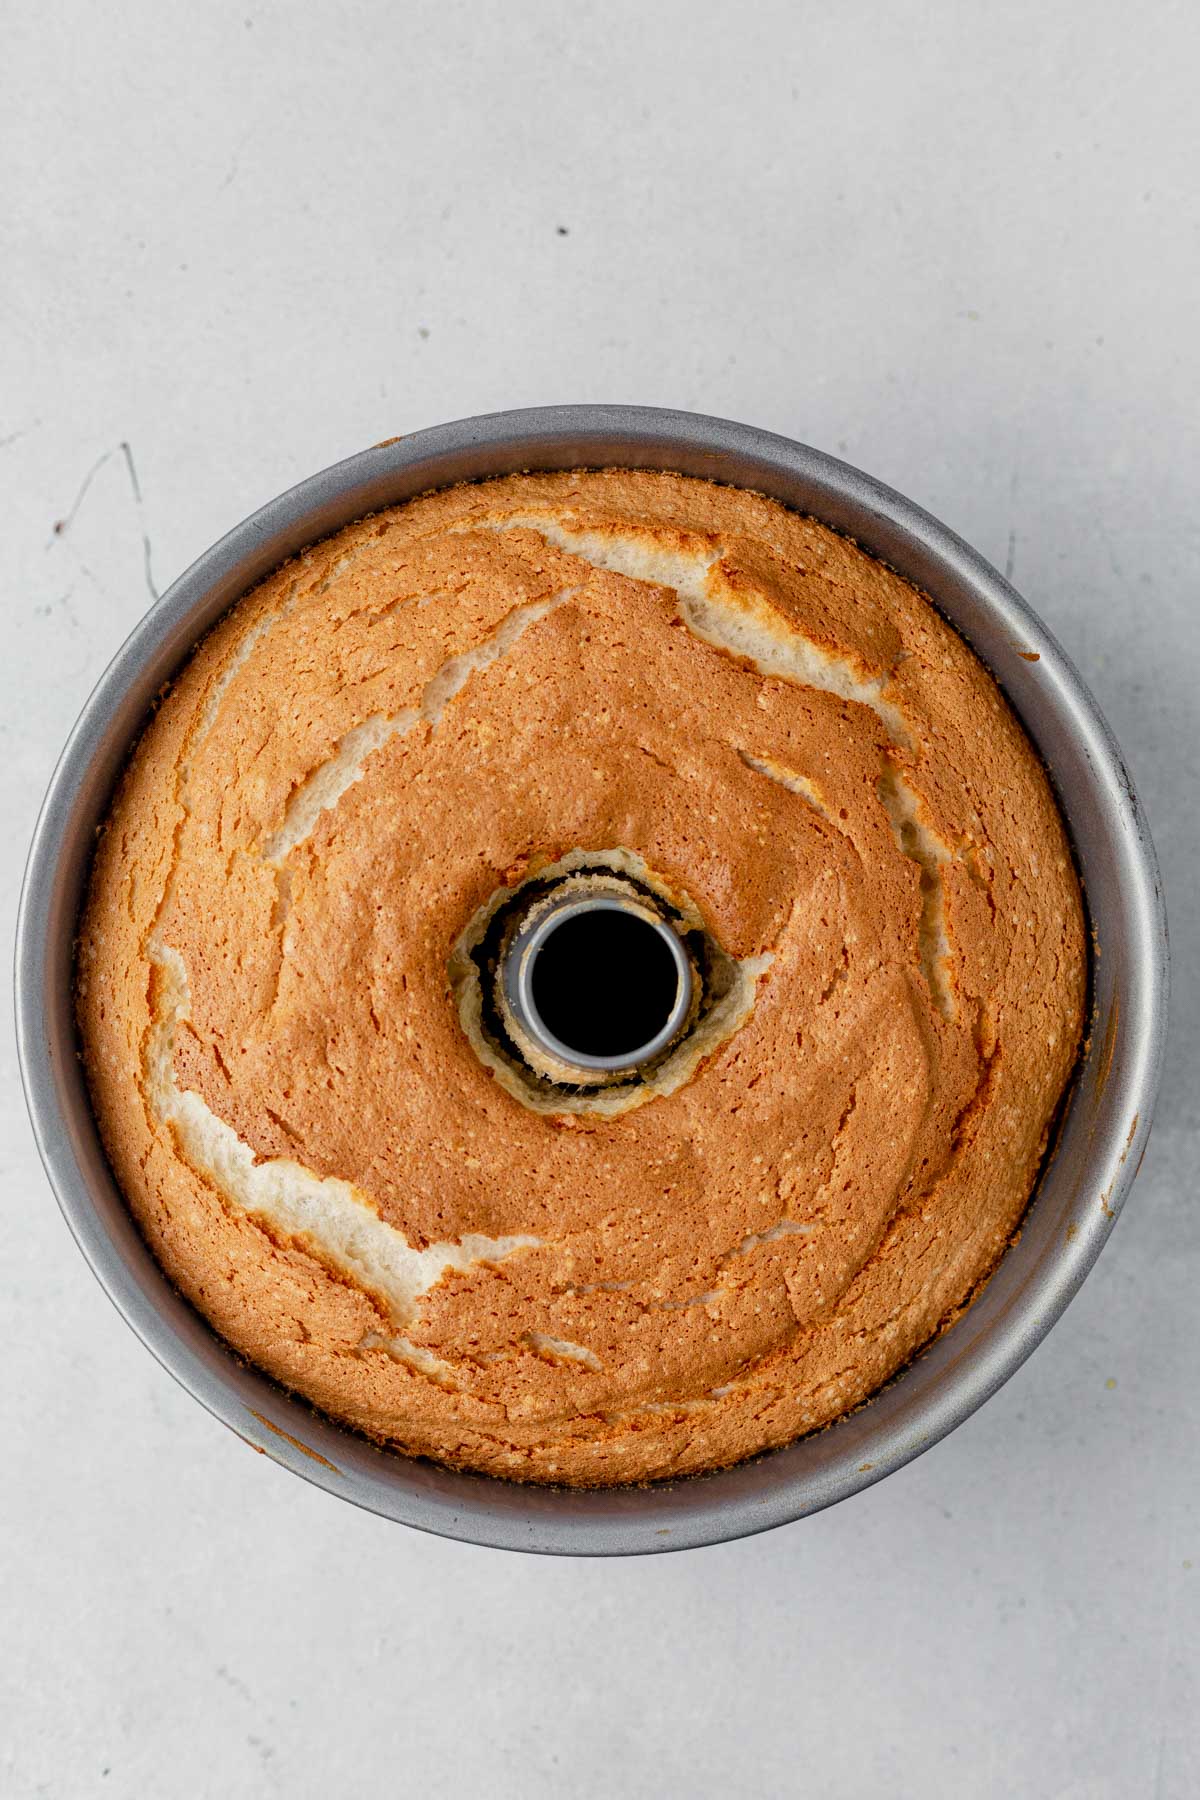 gluten-free angel food cake baked in the tube pan